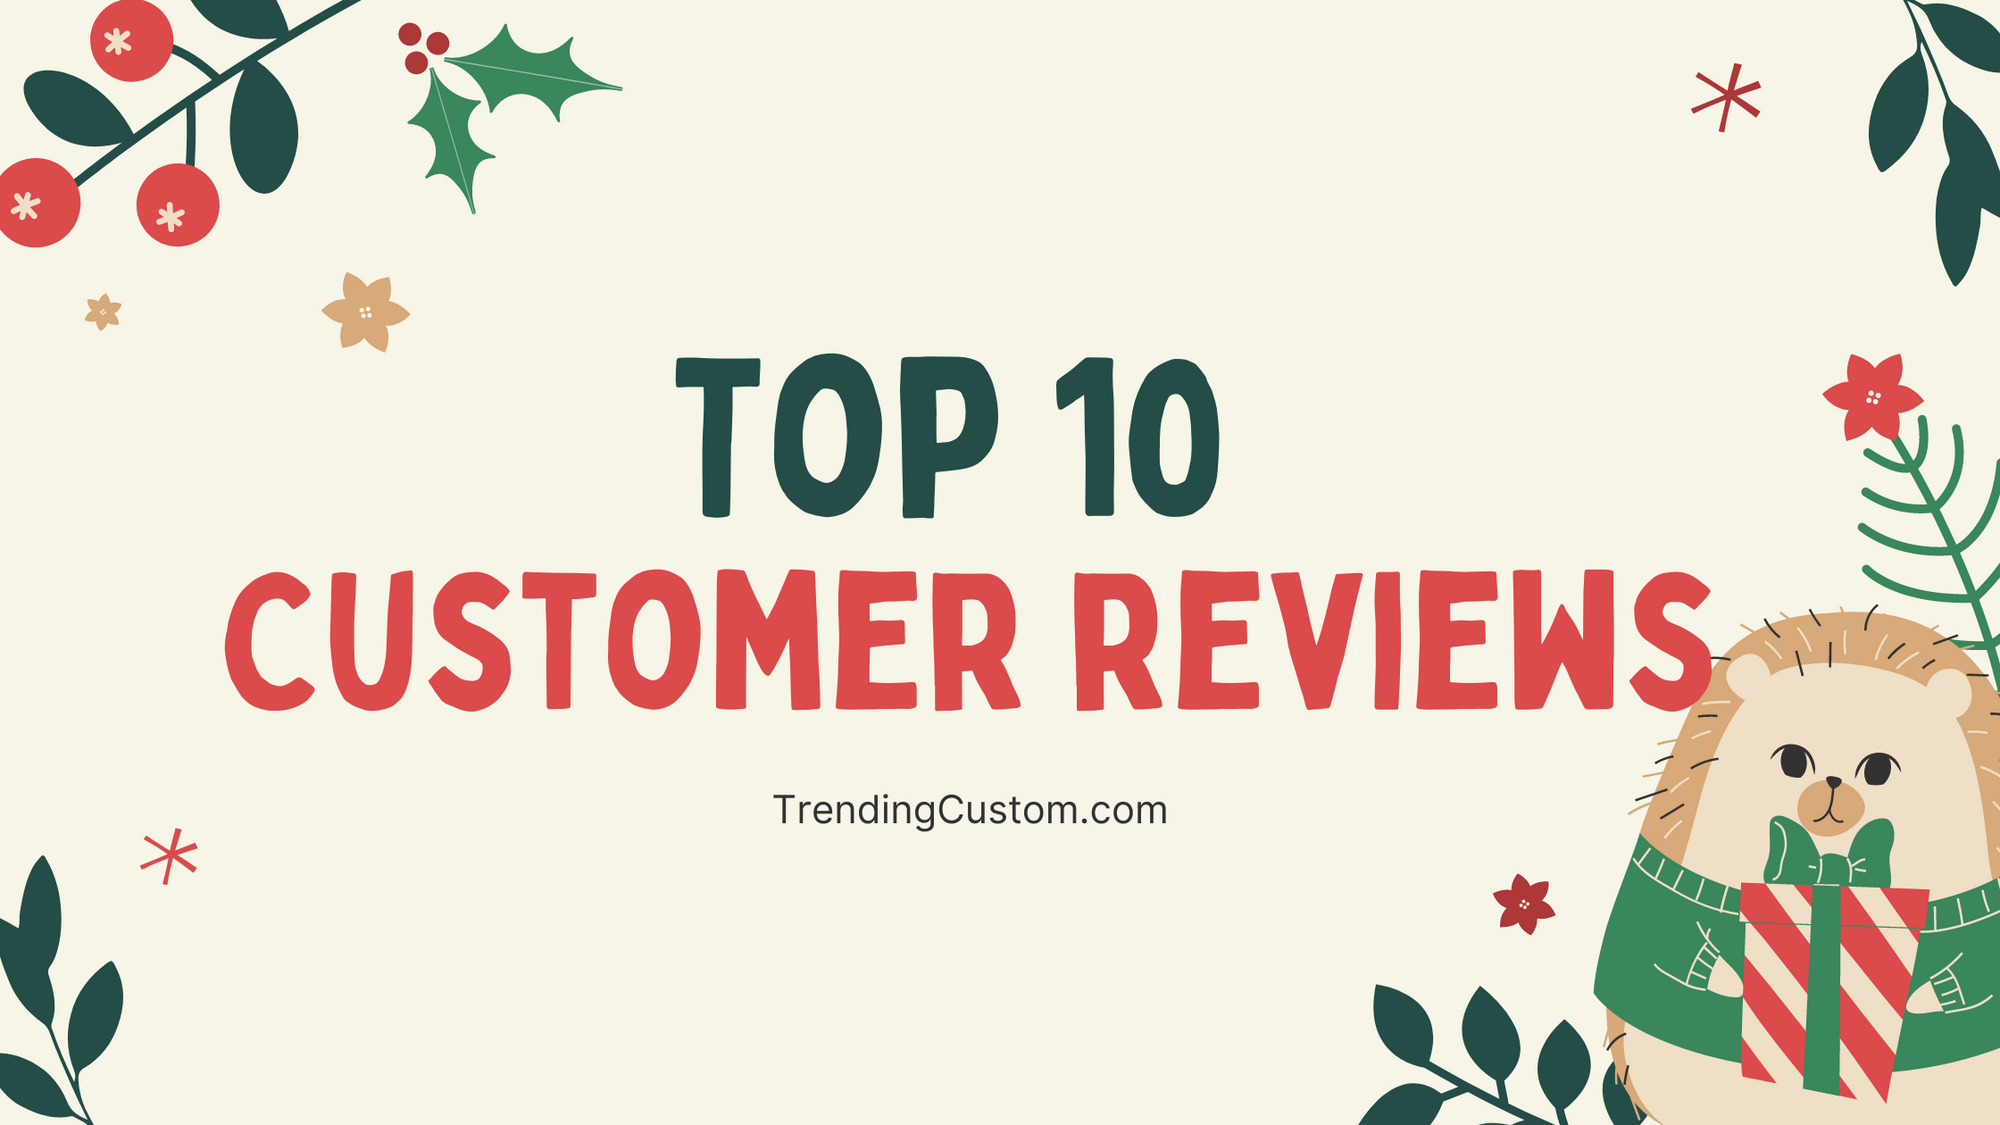 Top 10 Raving Reviews: Our Customers Speak Out! - December 8th